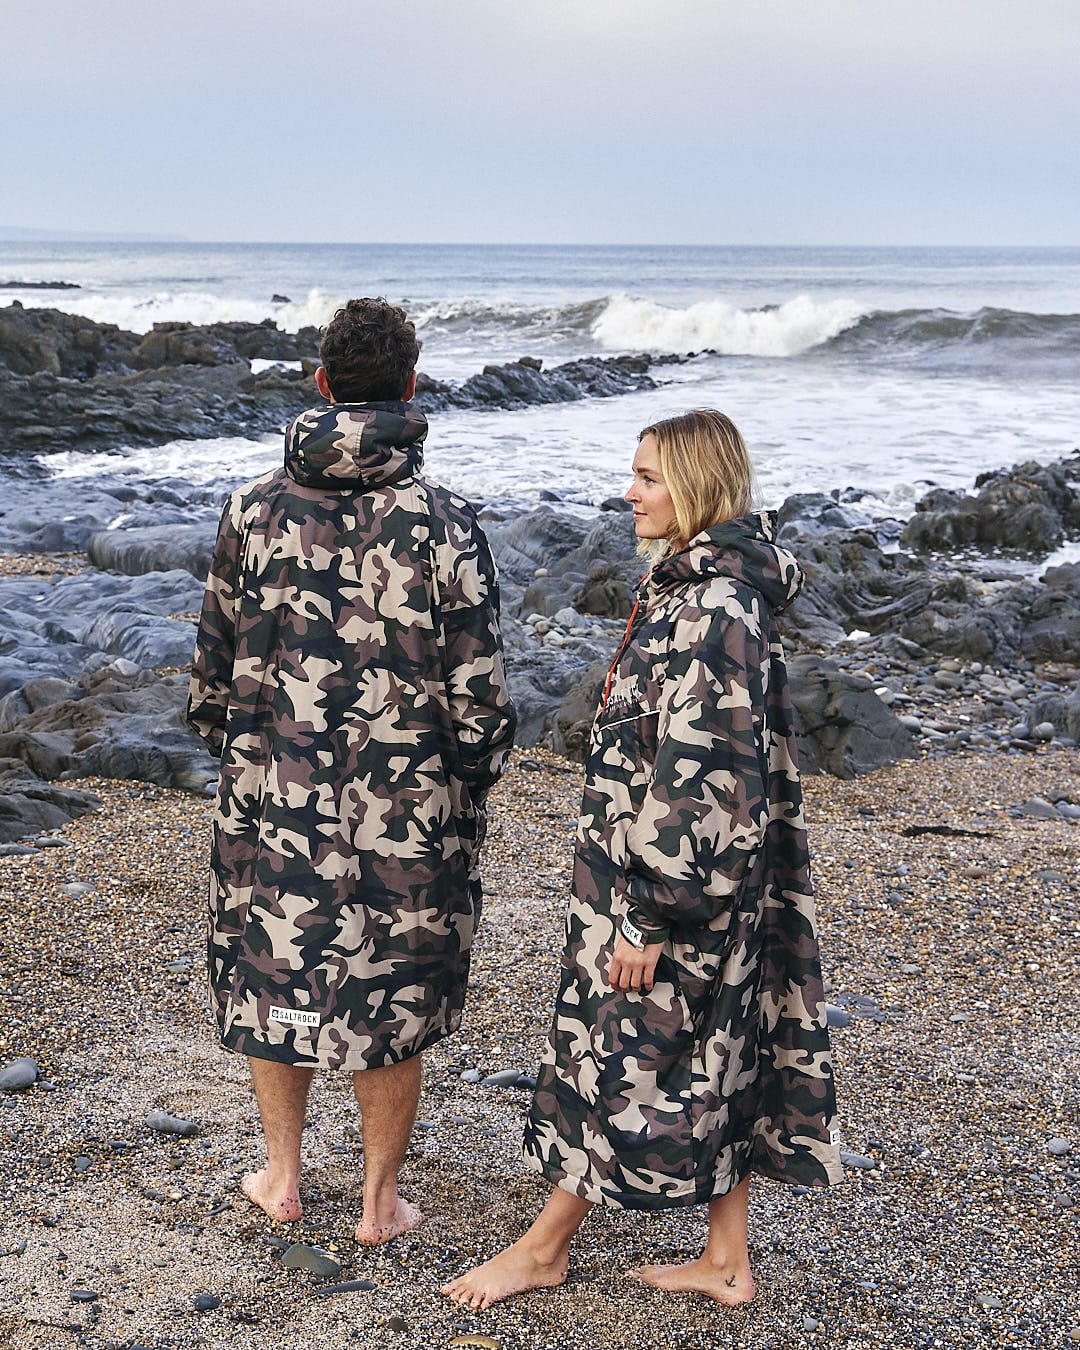 Two people wearing Saltrock's Recycled Four Seasons Changing Robe - Brown Camo standing on a beach looking at the sea.